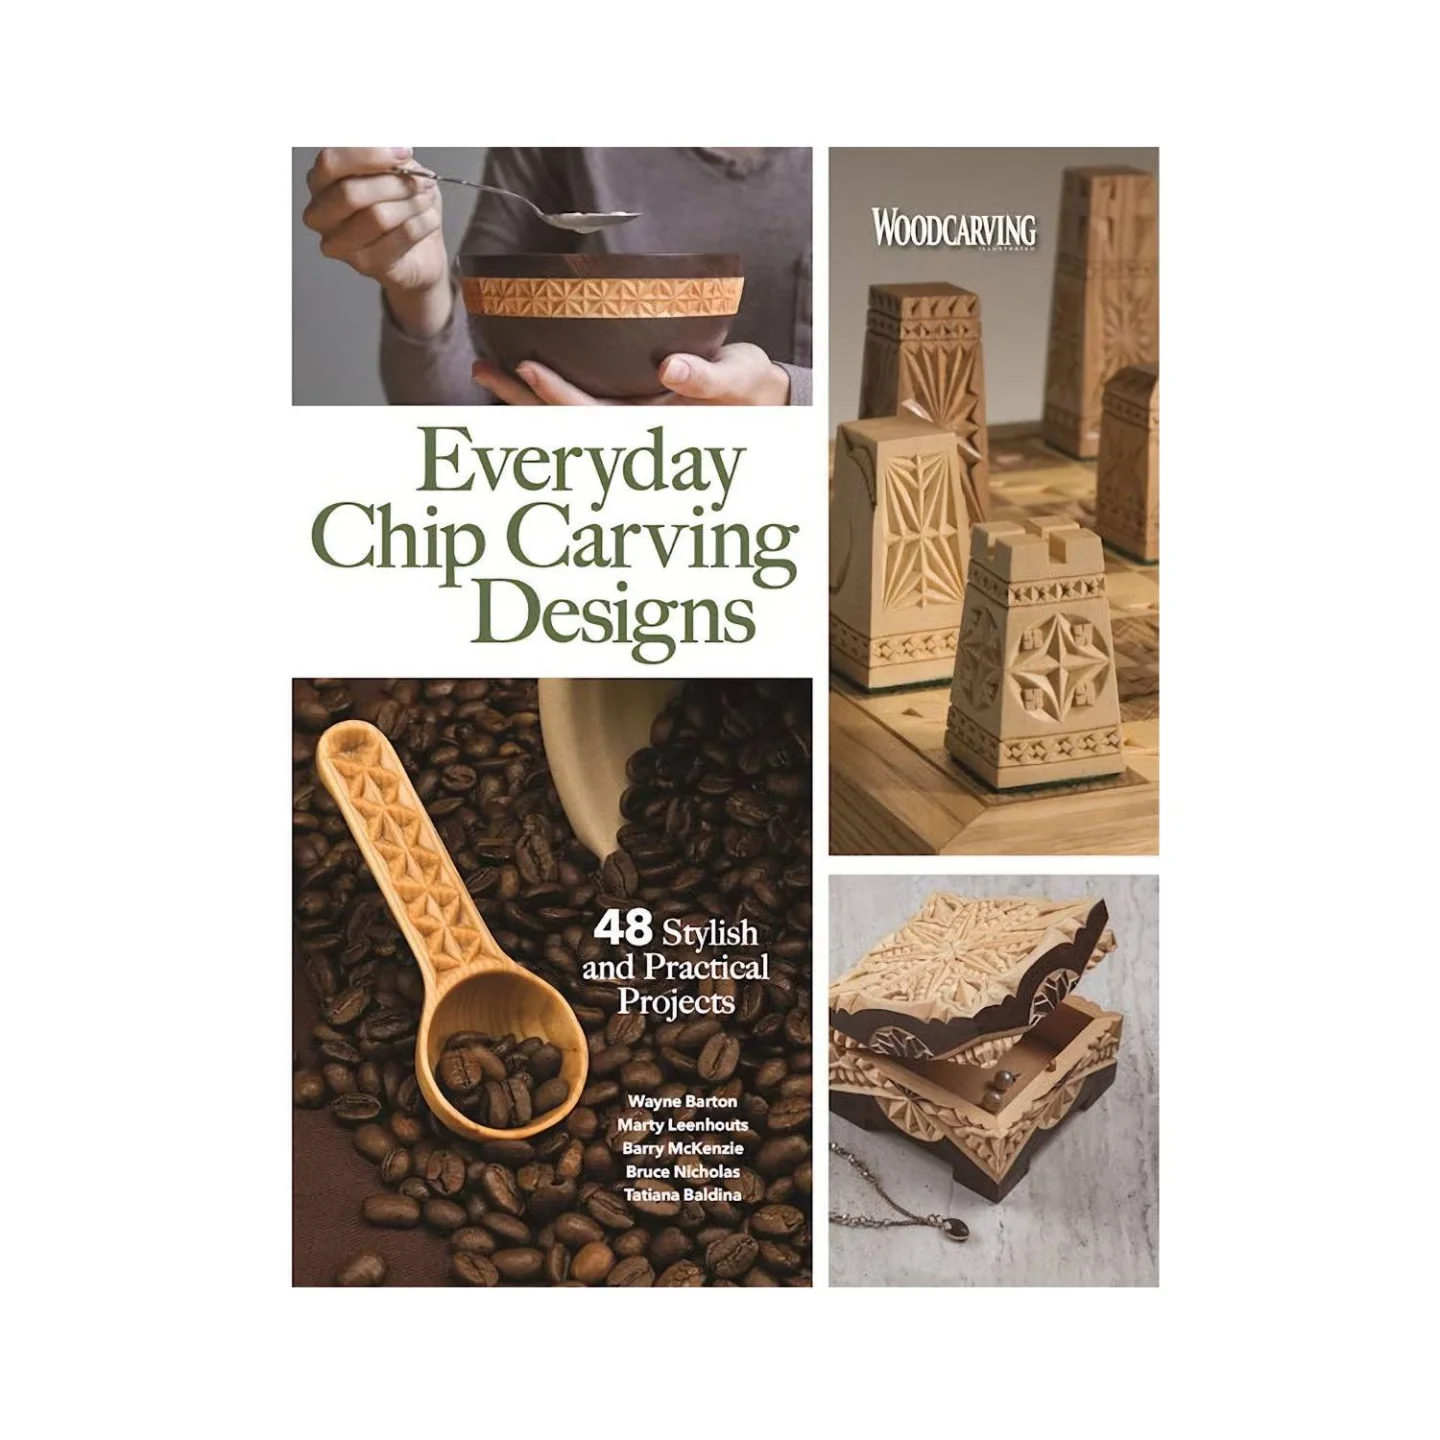 Everyday-Chip-Carving-Designs.